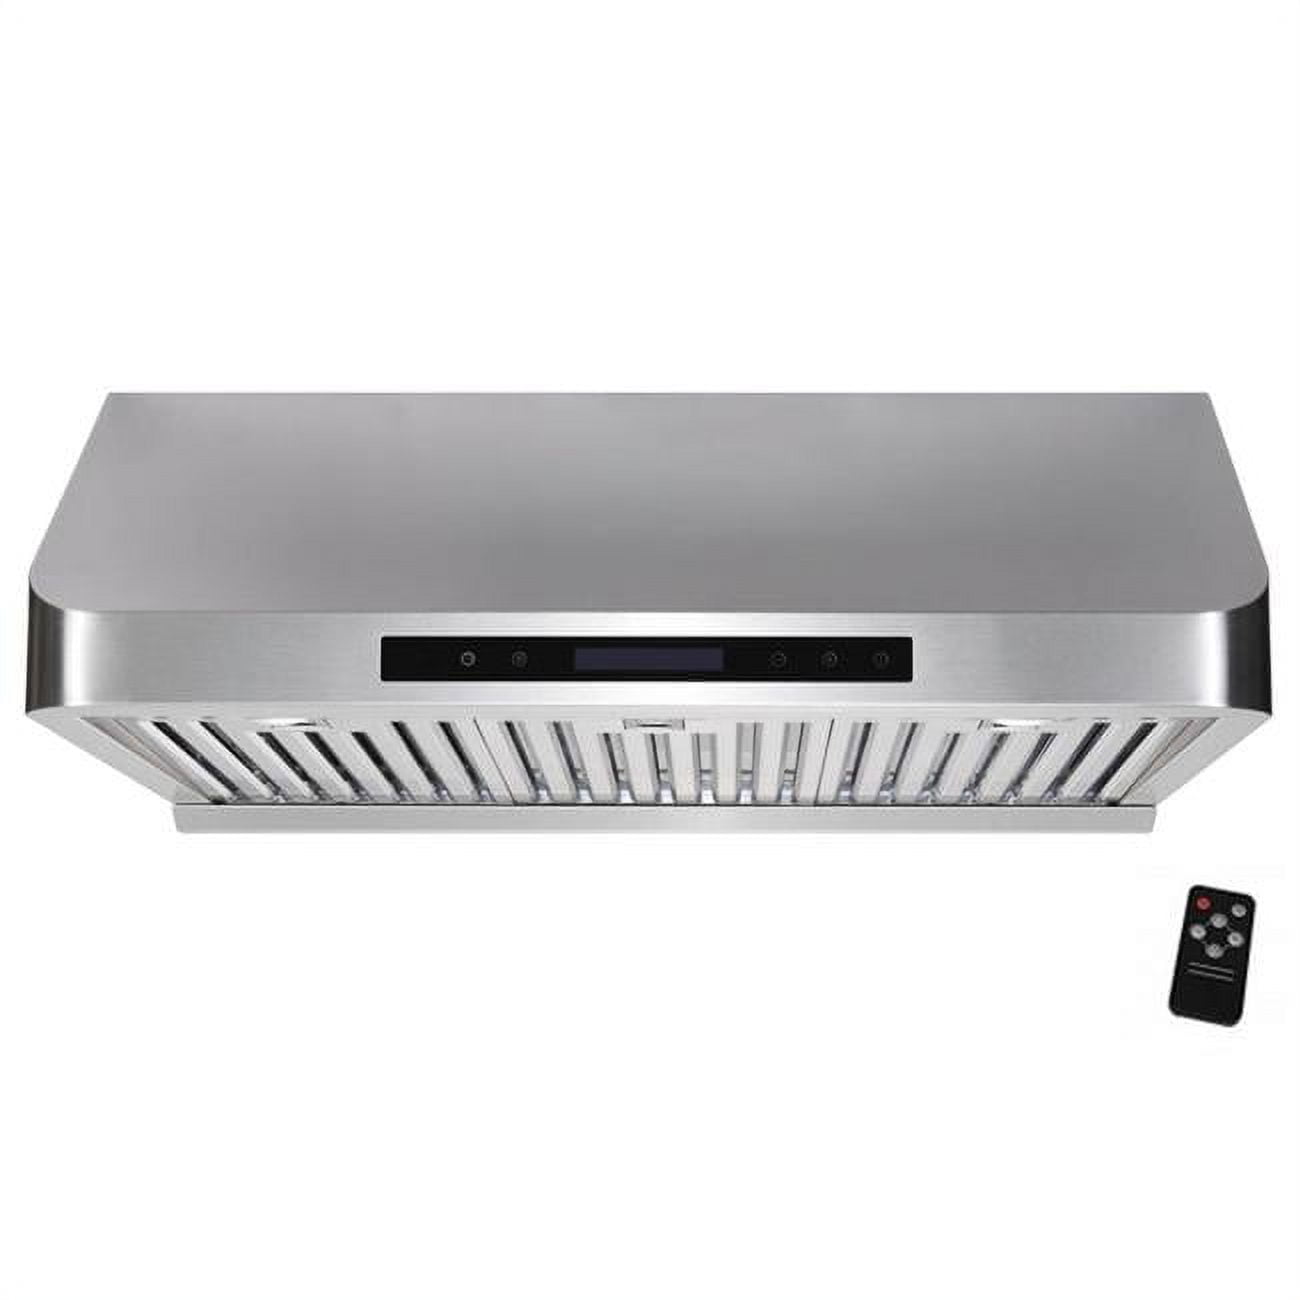 Awoco RH-S10-36E 36 x 10 in. Ducted Under Cabinet 4 Speeds 8 in. Top Vent Stainless Steel Range Hood